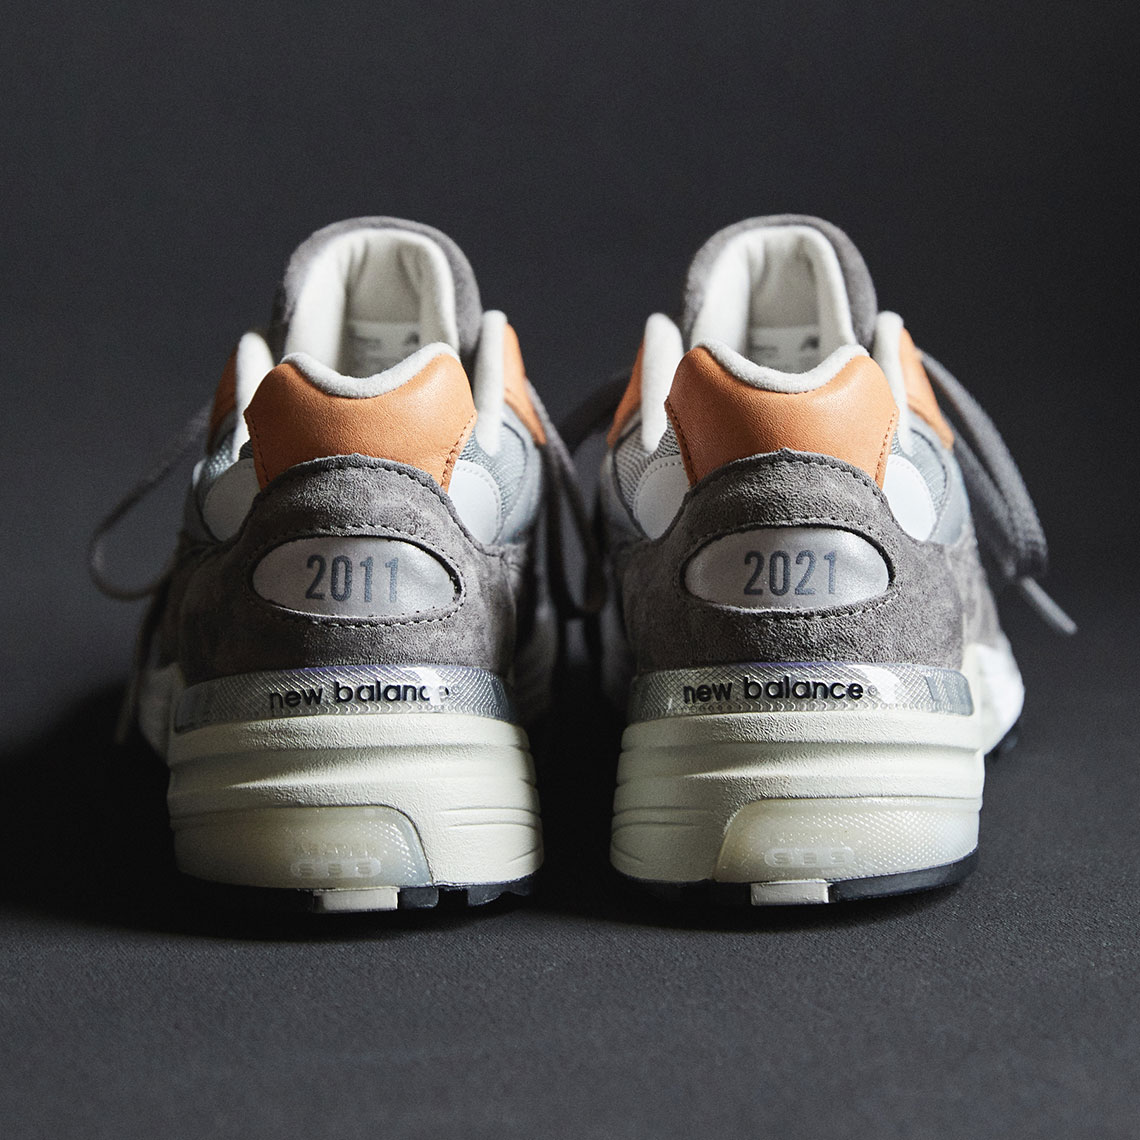 Todd Snyder New Balance 992 10th Anniversary Release Date 7